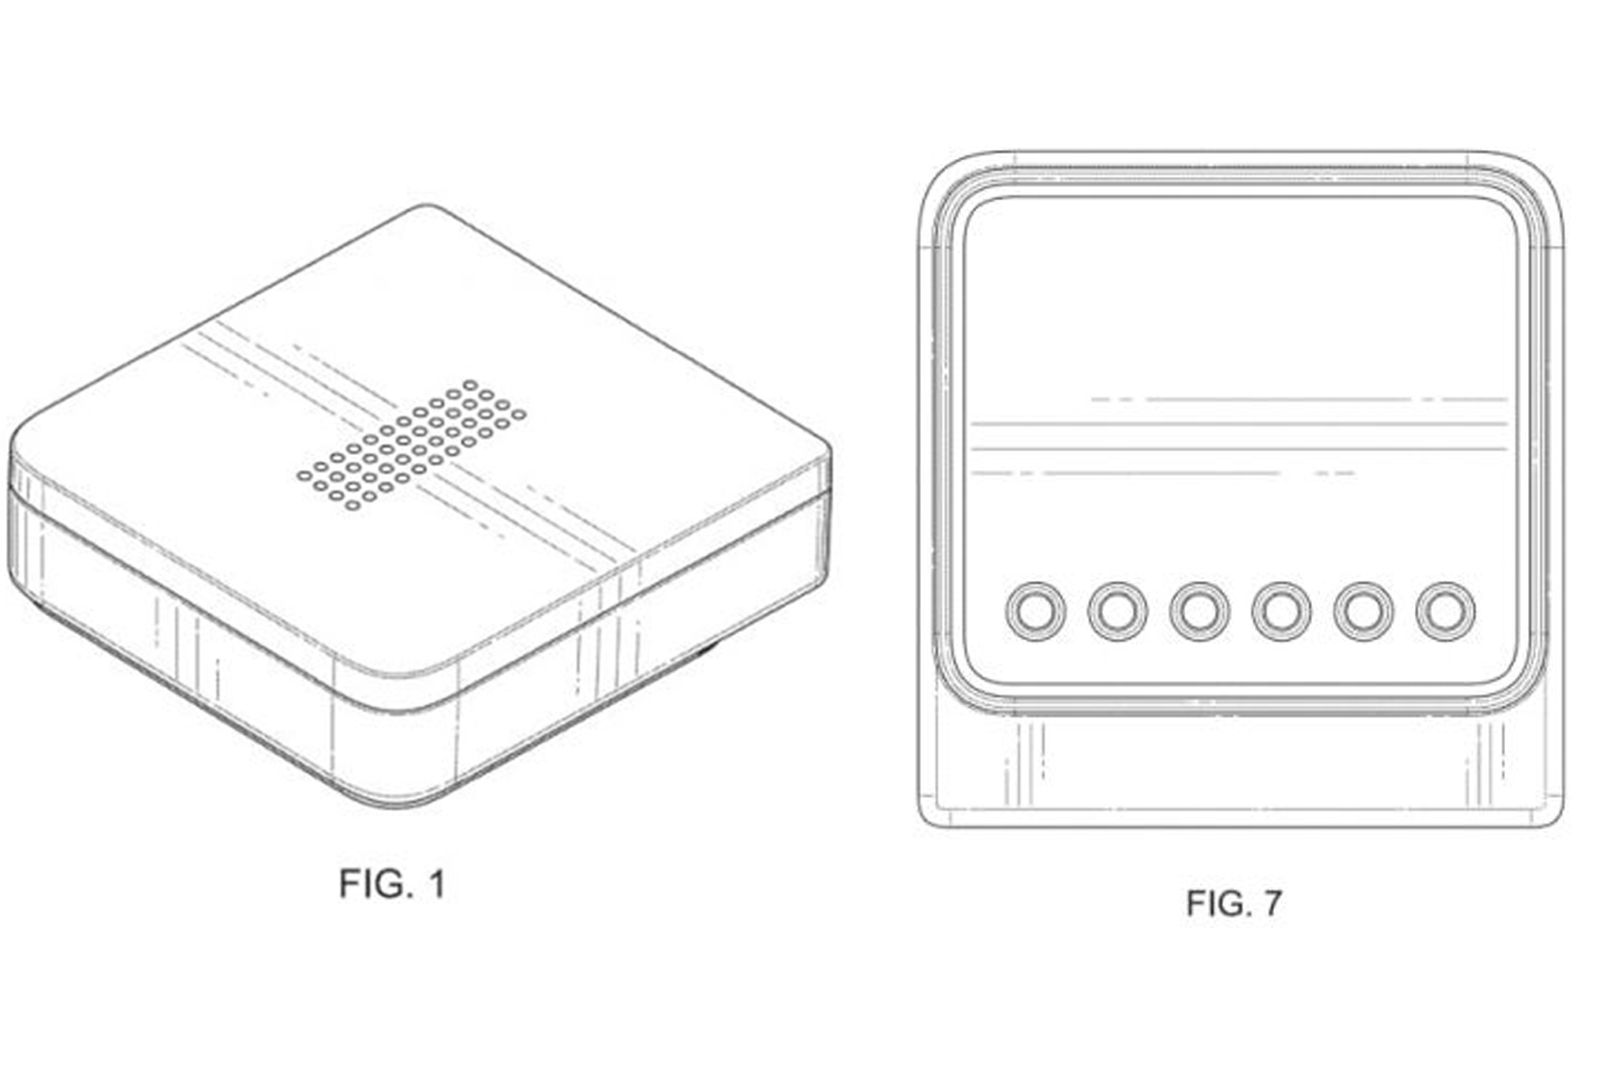 Is this Facebooks smart speaker Patent application reveals possible design image 1